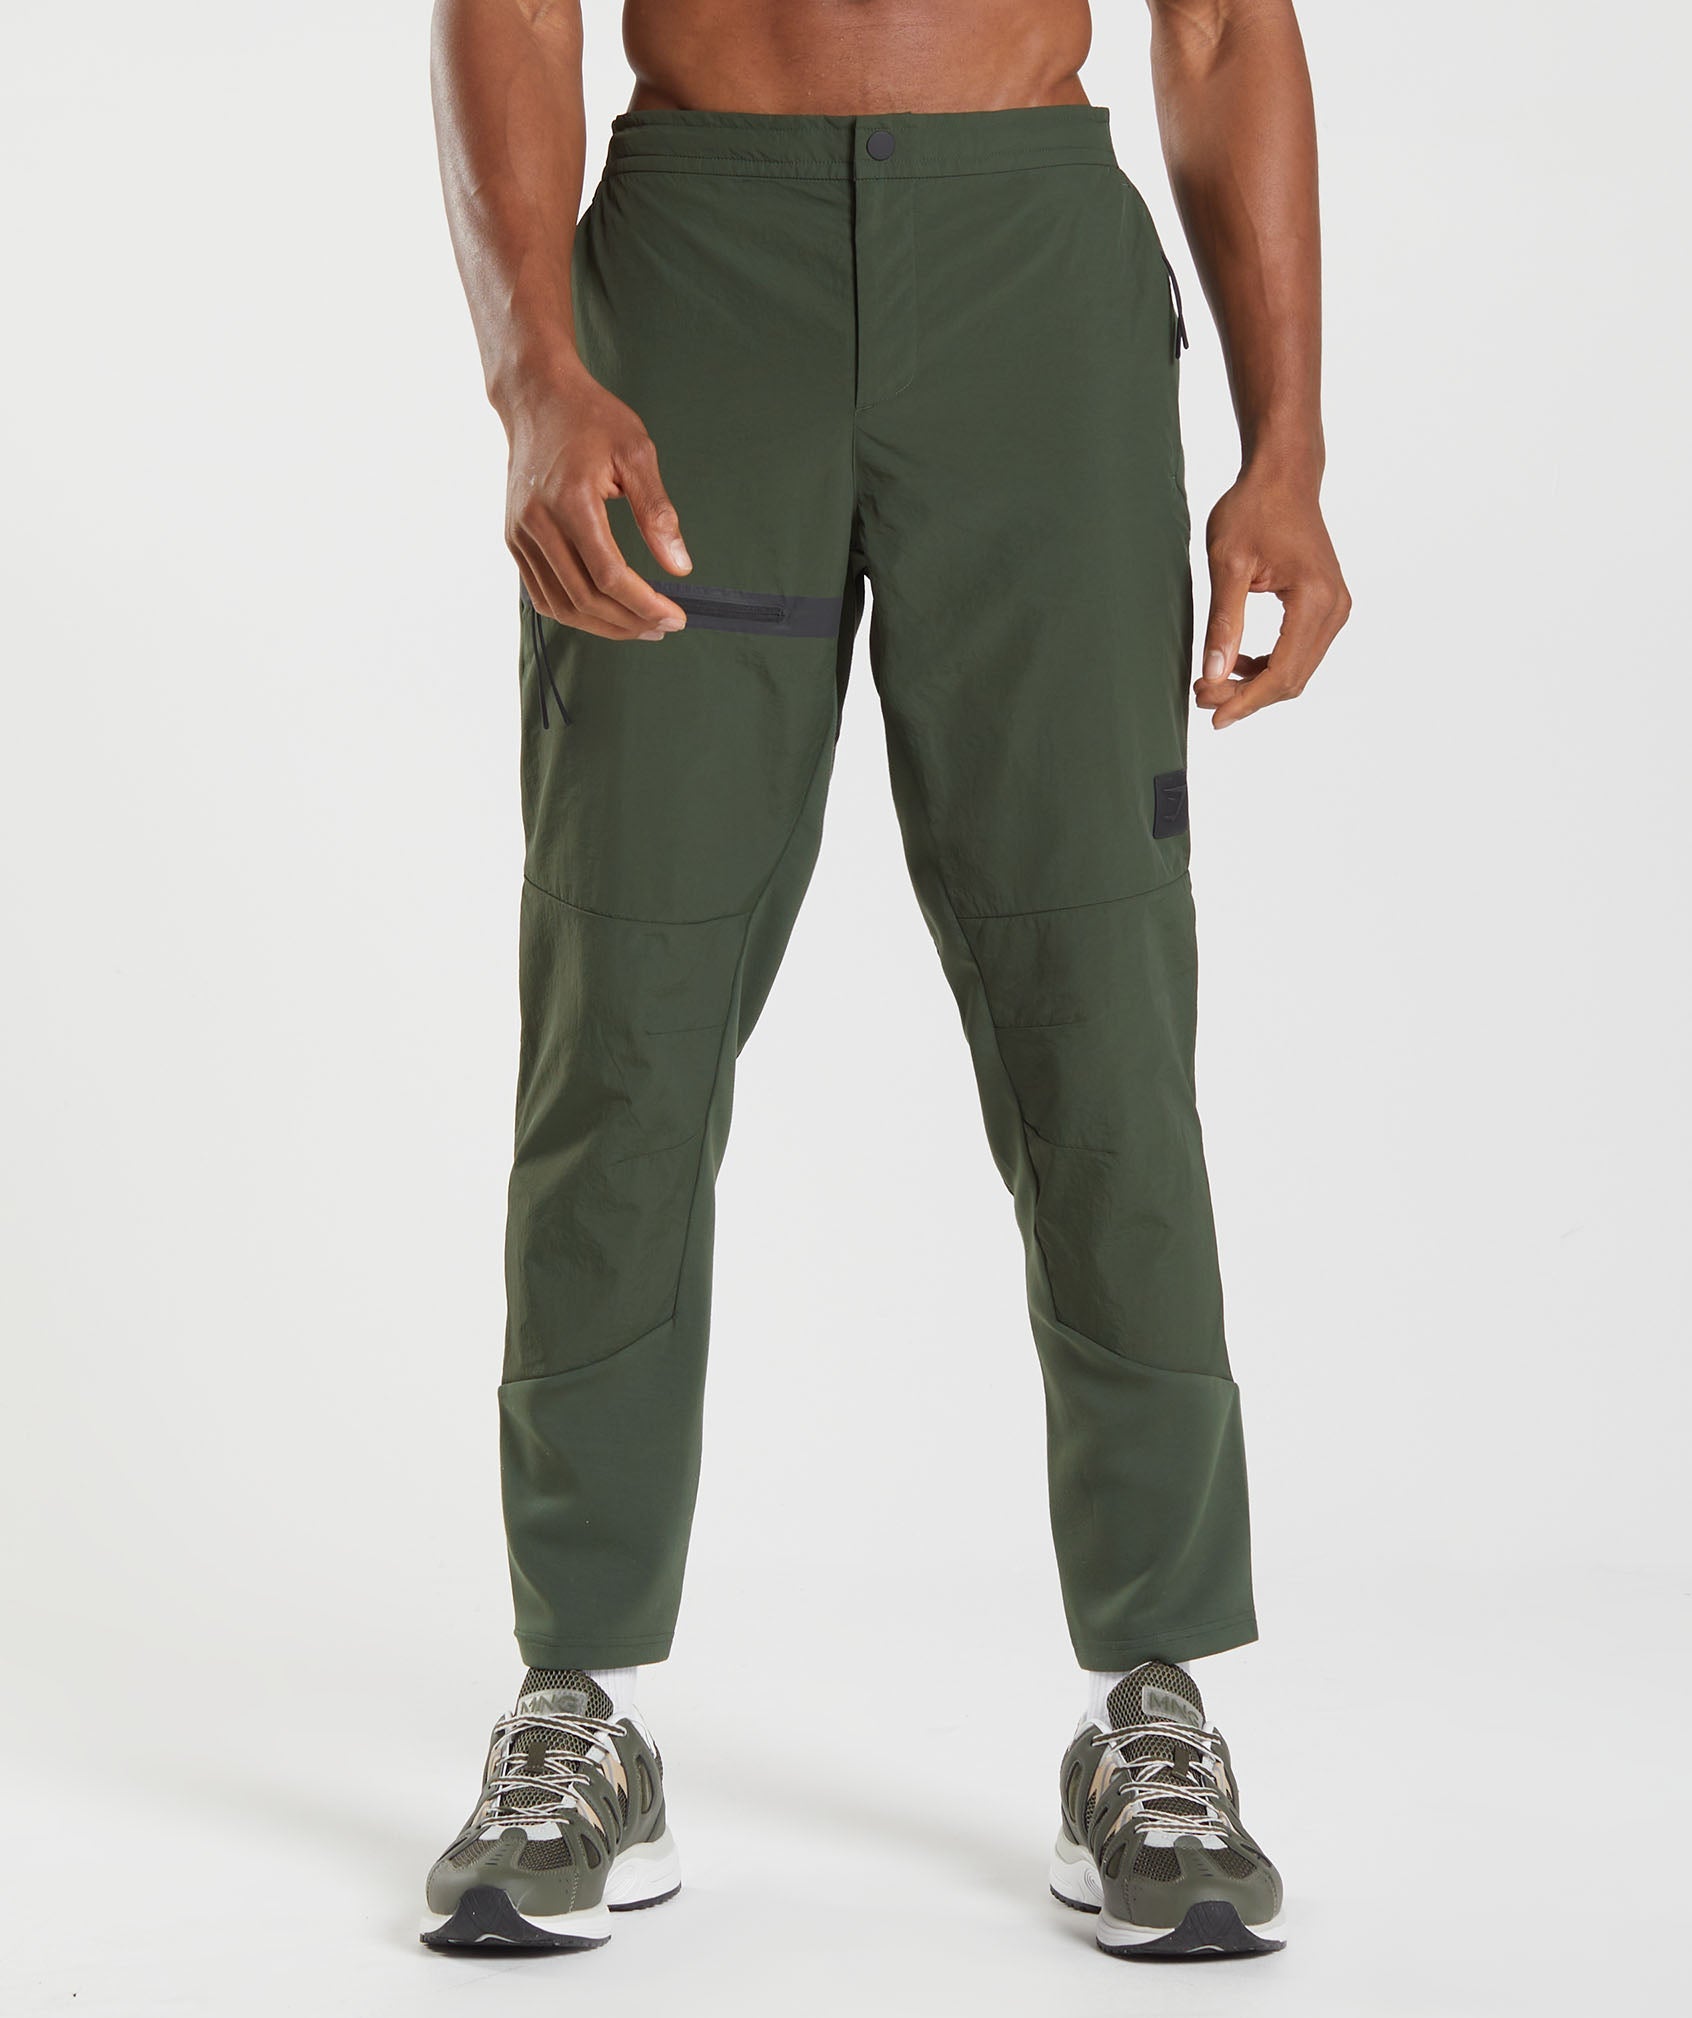 Retake Woven Joggers in Moss Olive - view 1